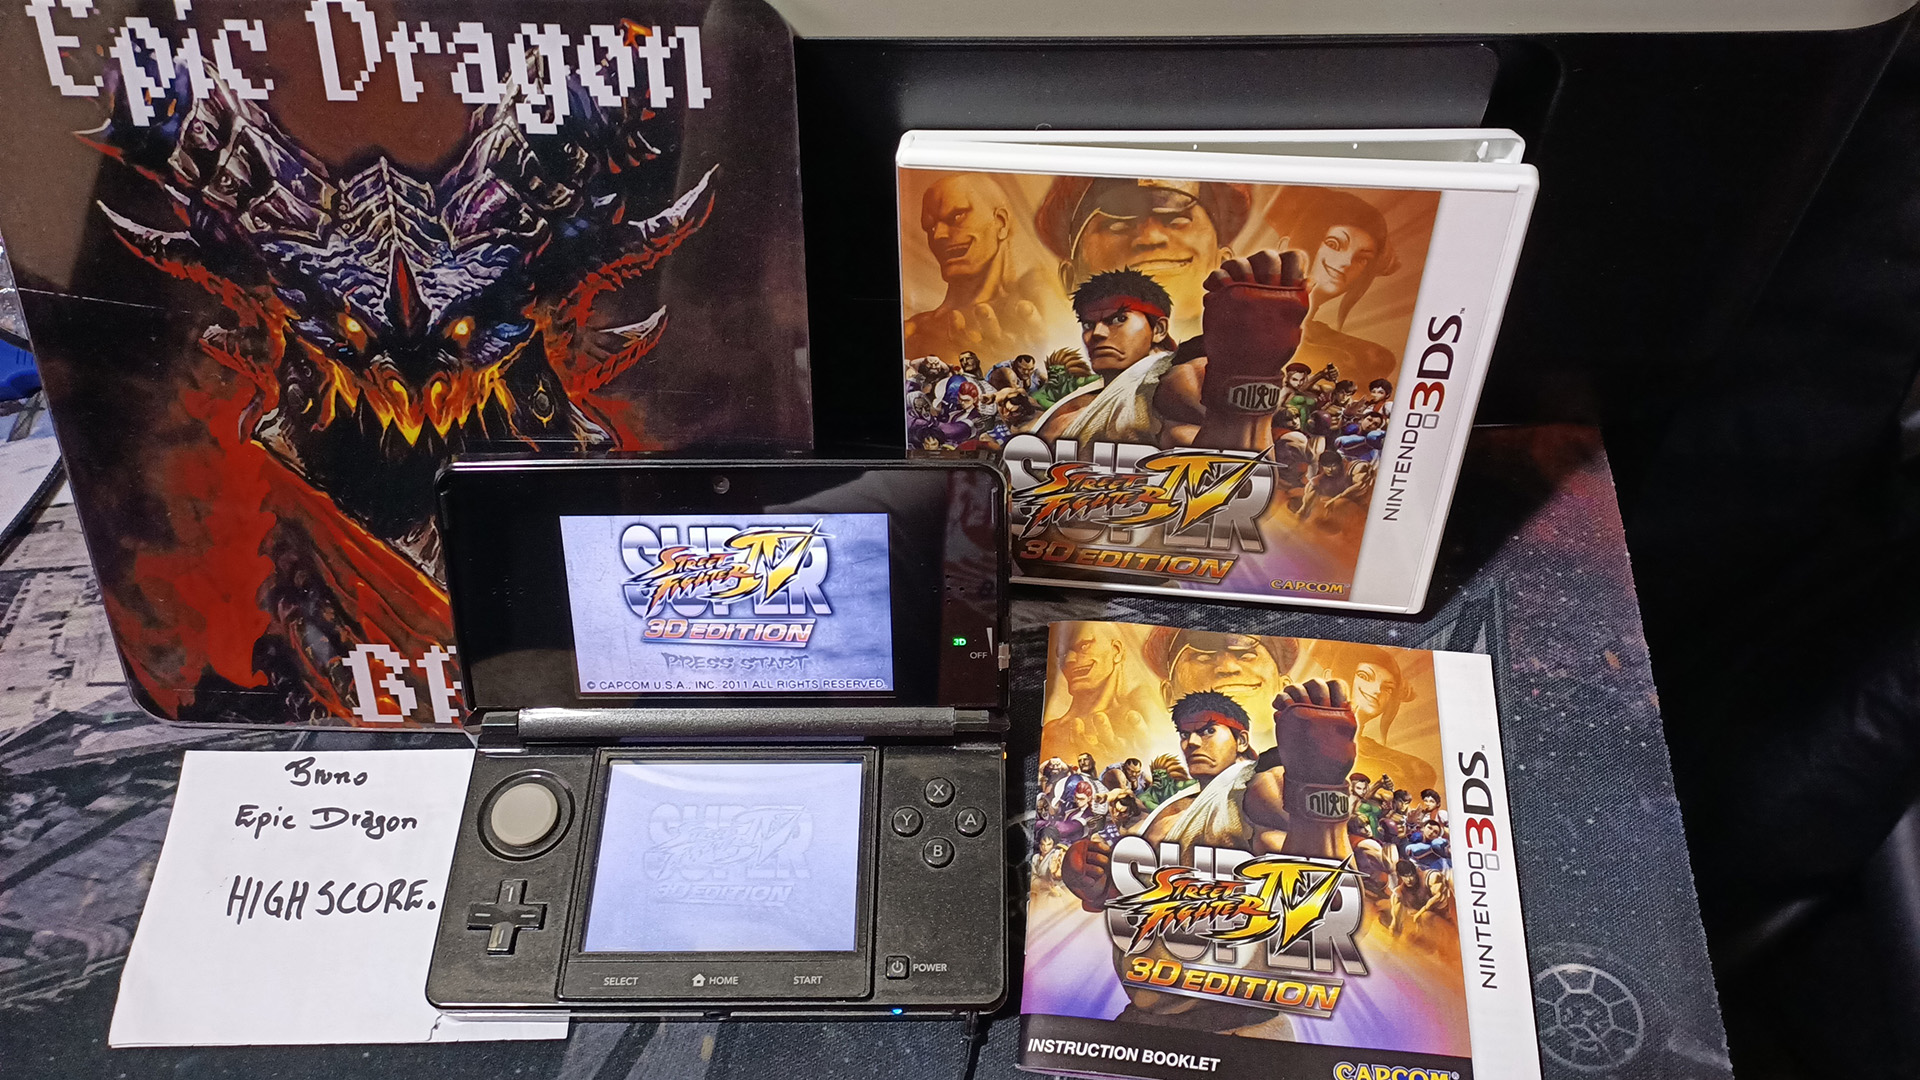 EpicDragon: Super Street Fighter IV 3D Edition: Arcade: Ryu (Nintendo 3DS) 677,700 points on 2022-08-17 21:10:18